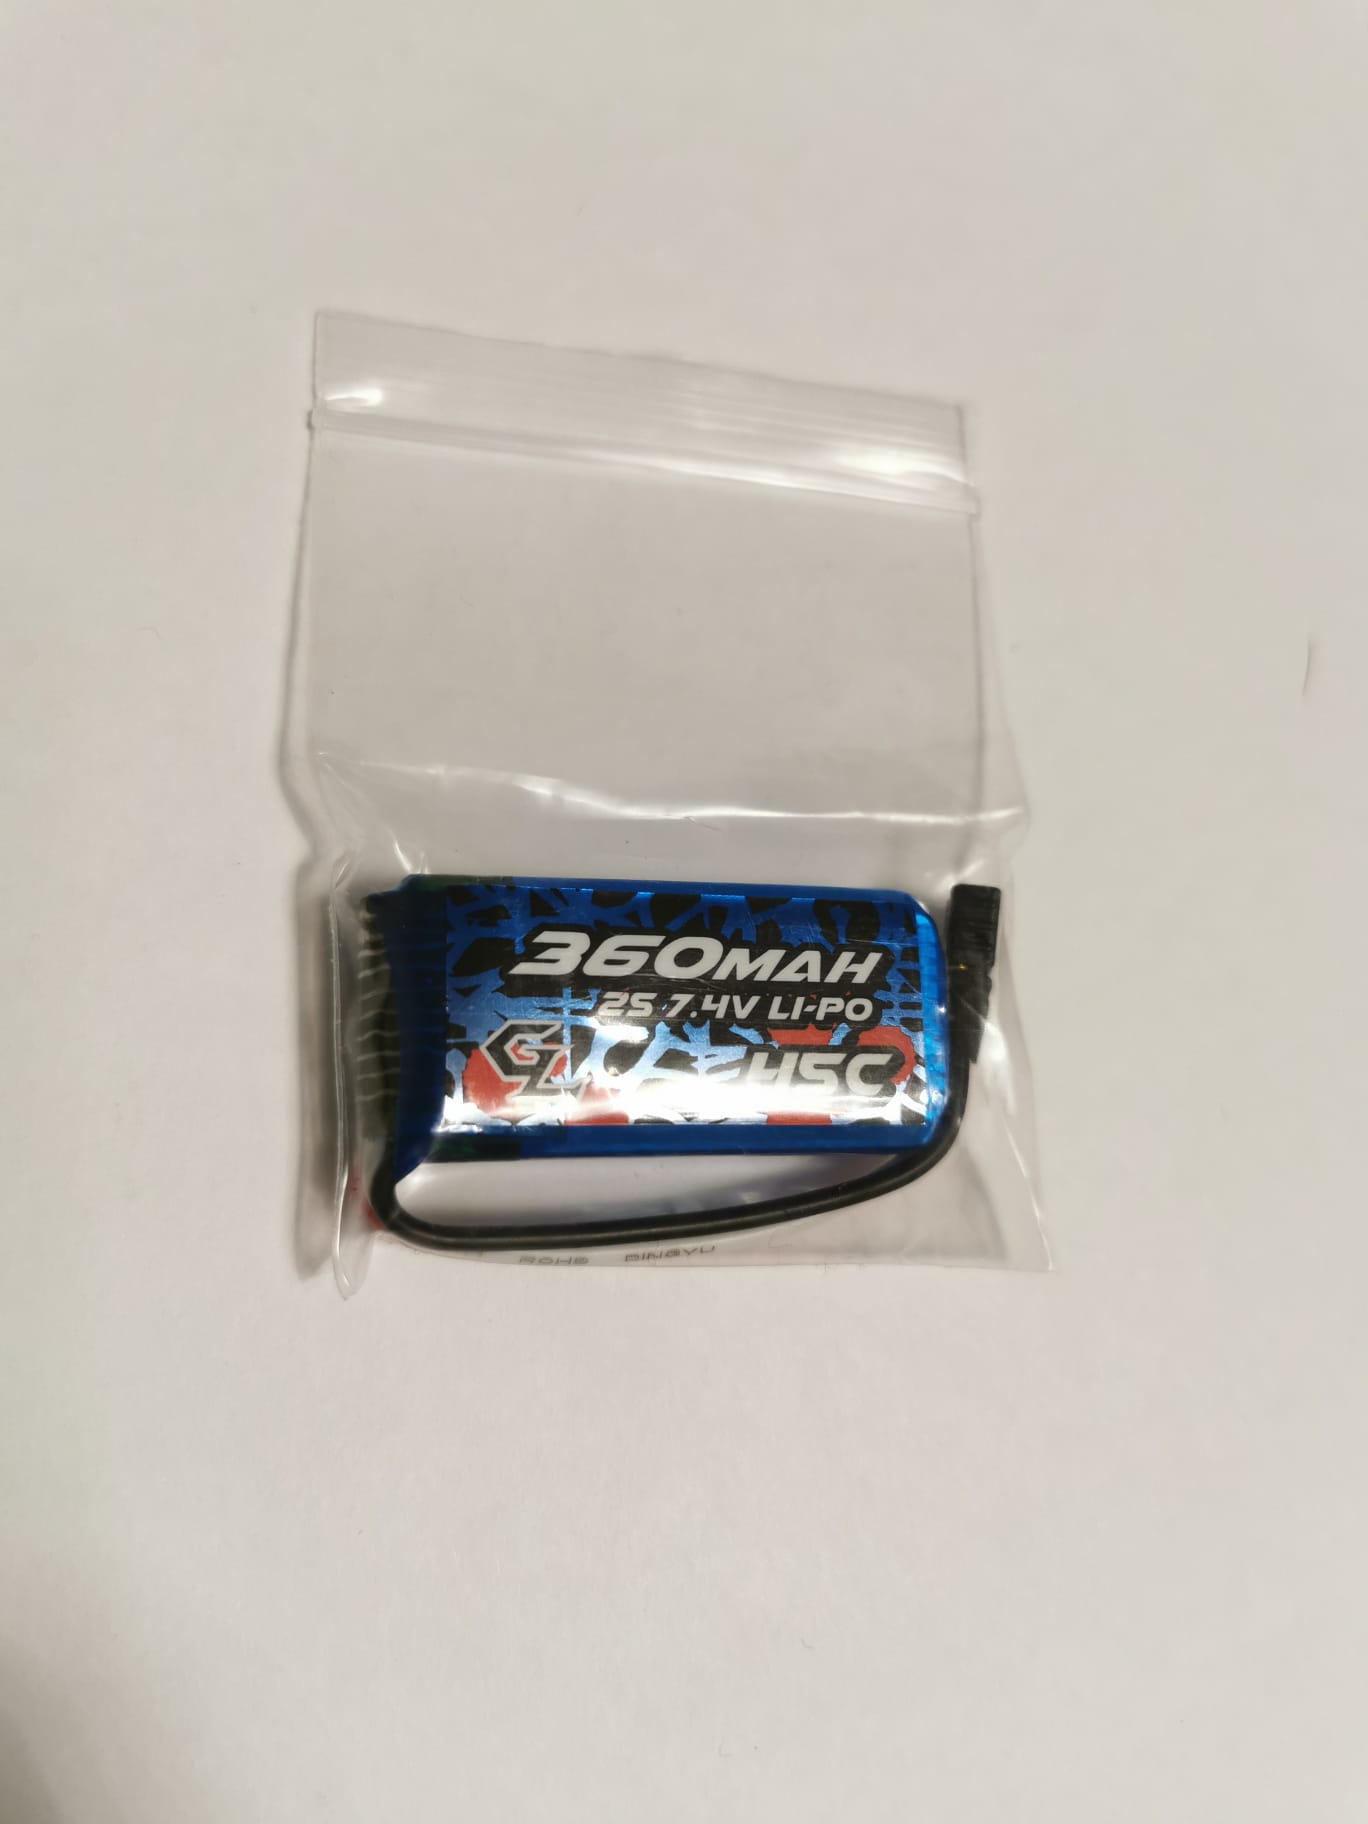 Lipo Pack / 7.4V / 2S / GL Racing / 360mAh / 45C Discharge with GL connector